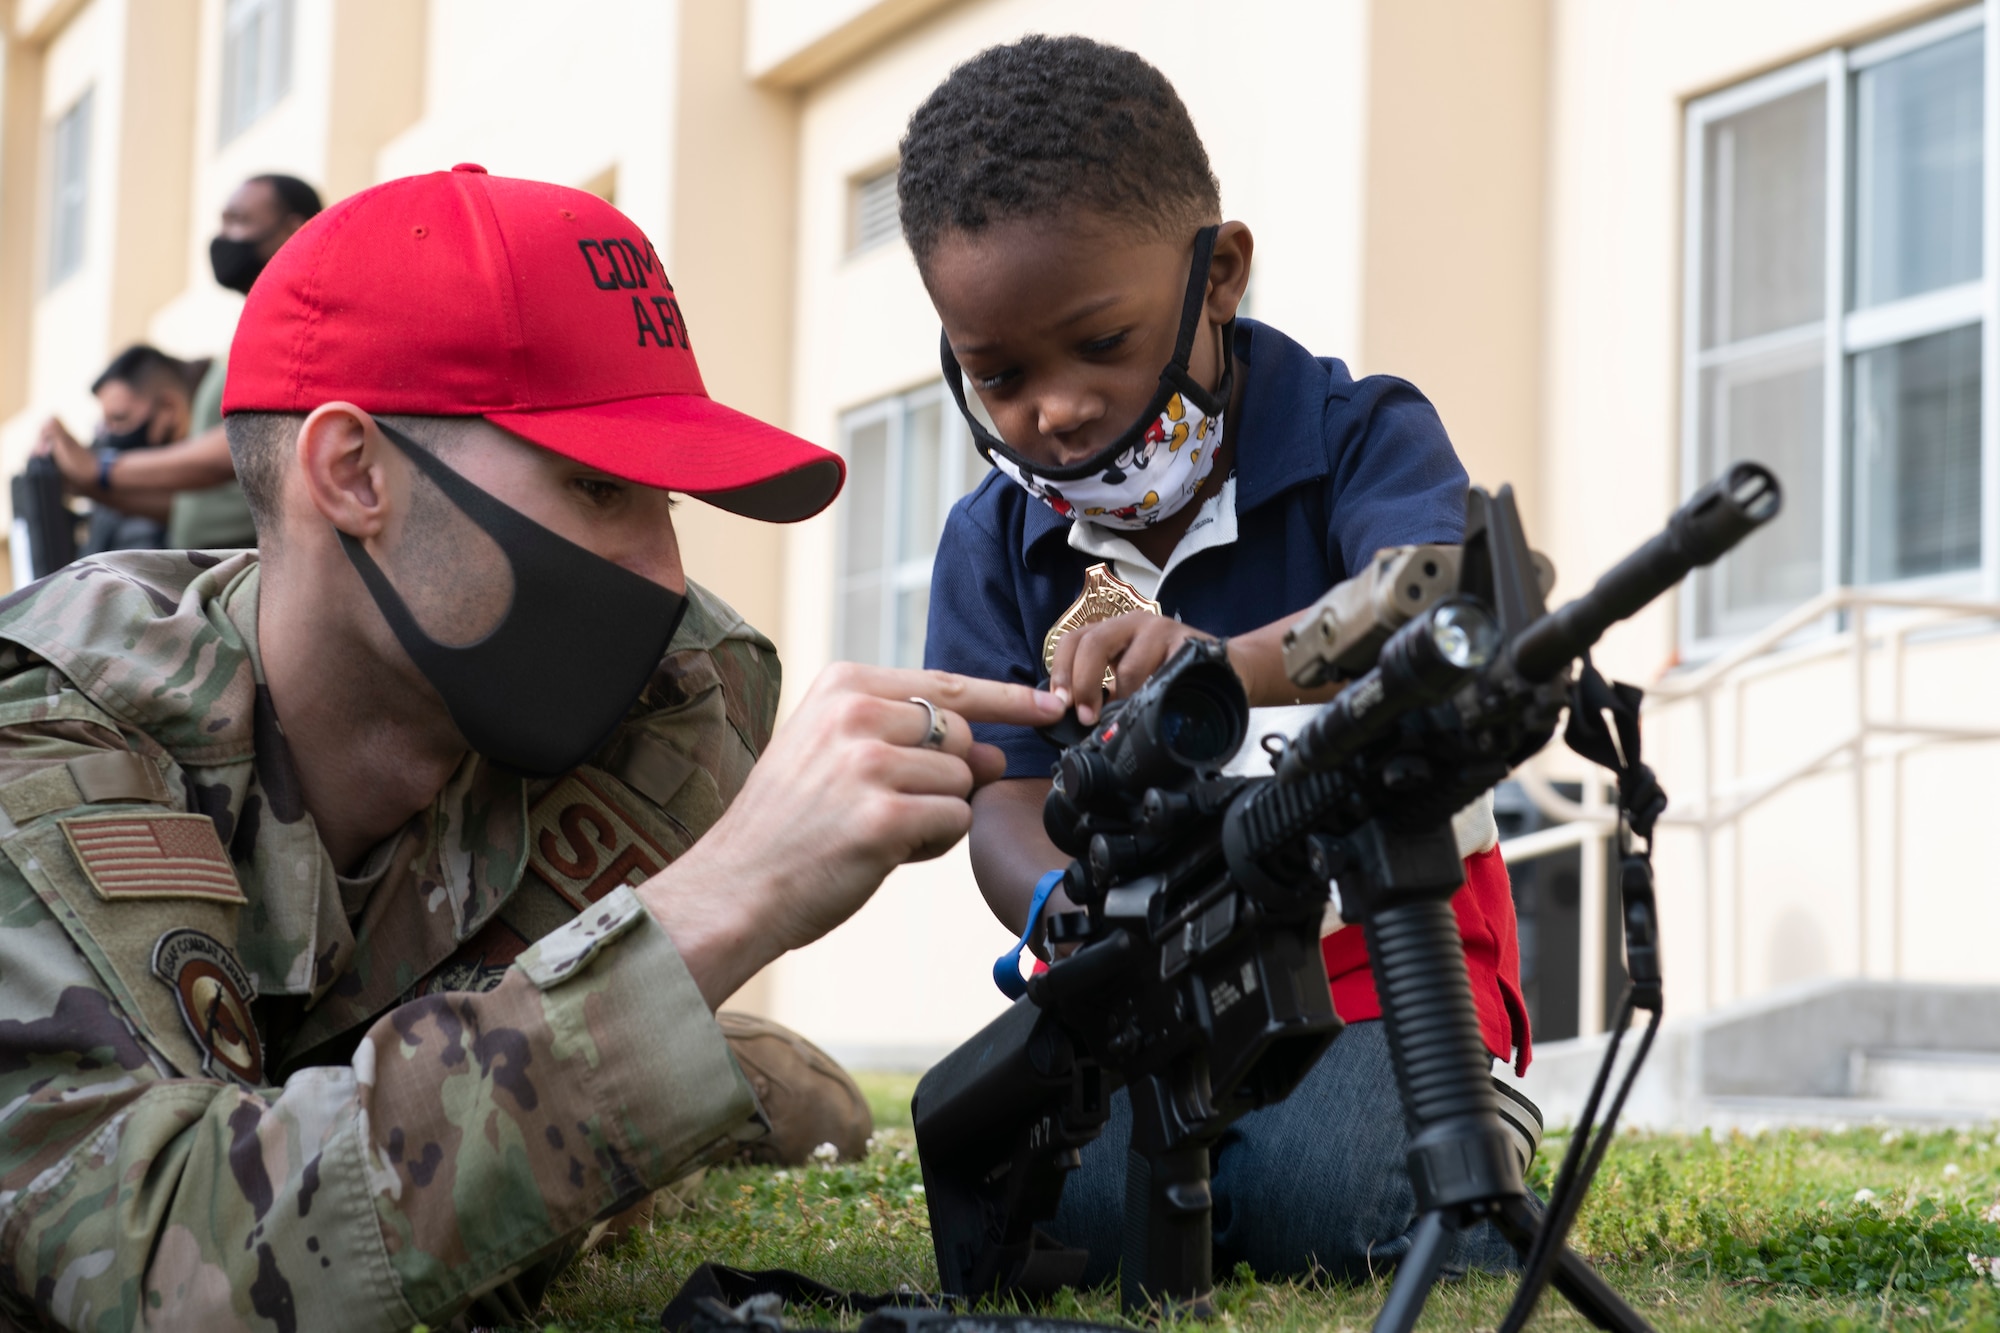 Staff Sgt. Boaz Rogel, 374th Security Forces Squadron Combat Arms instructor, left, teaches Khyran Grandison how a scope works at the “Day in the Life” event during National Police Week at Yokota Air Base, Japan, May 11, 2021.  The event featured booths from combat arms and military working dogs as well as the Air Force Office of Special Investigations to help familiarize the base on they protect the base. (U.S. Air Force photo by Staff Sgt. Joshua Edwards)